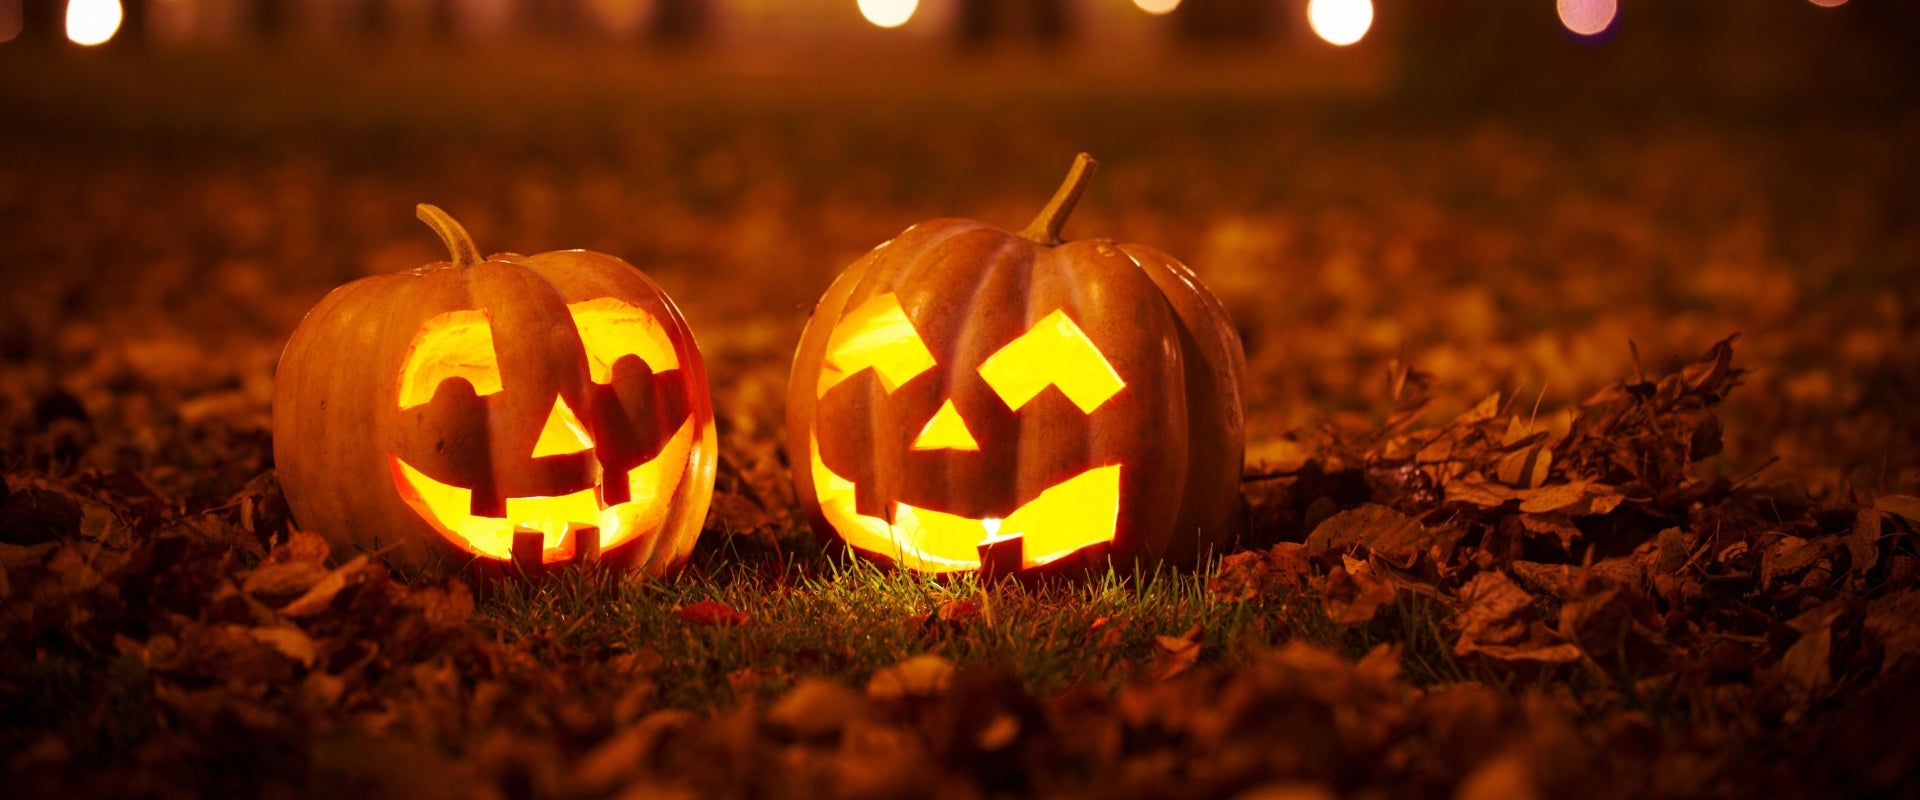 Two carved and lit up Halloween pumpkins in a patch of fallen leaves at night. 